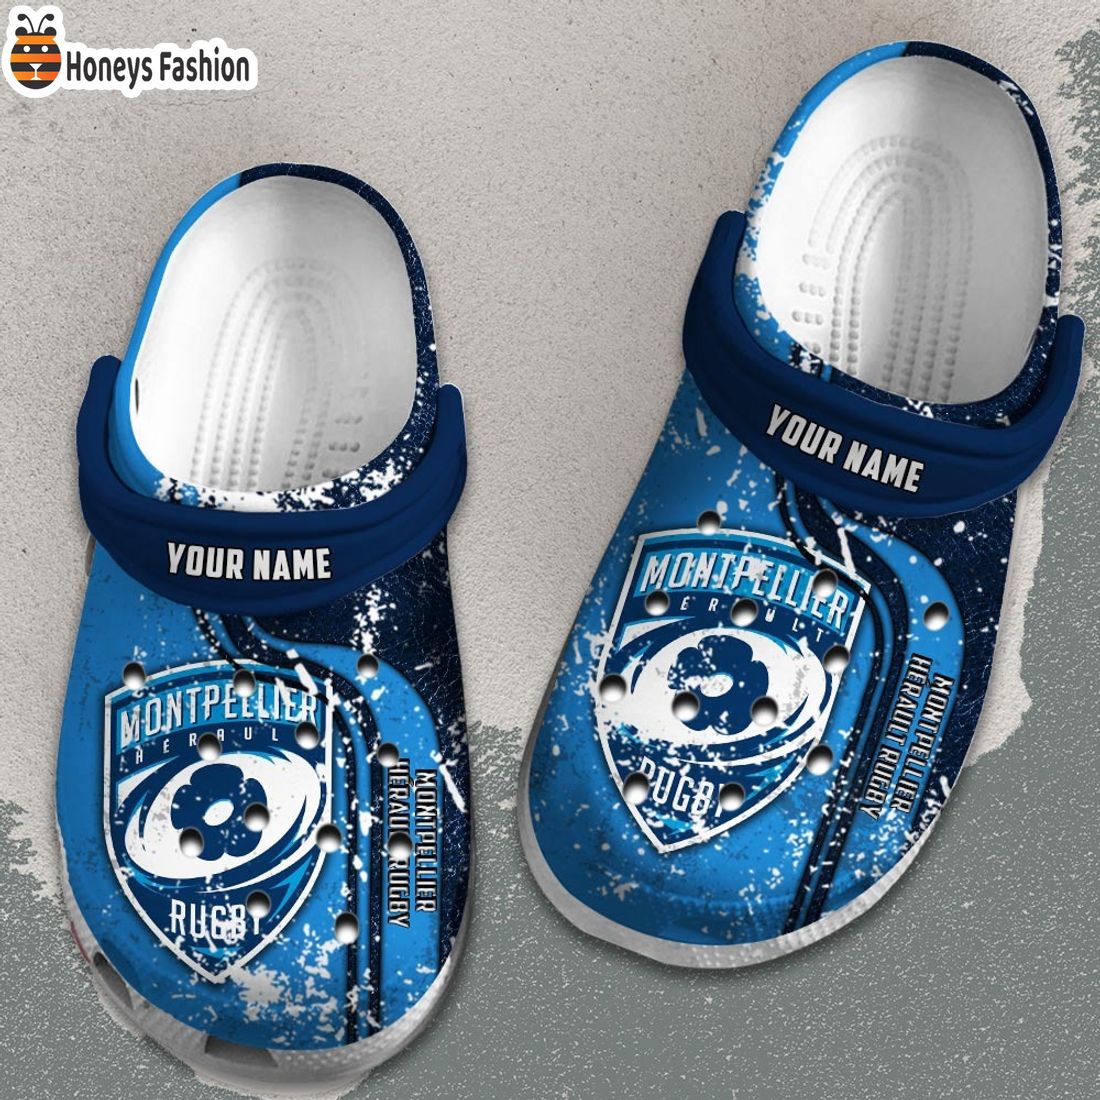 Montpellier Herault Rugby Custom Name Crocs Clog Shoes